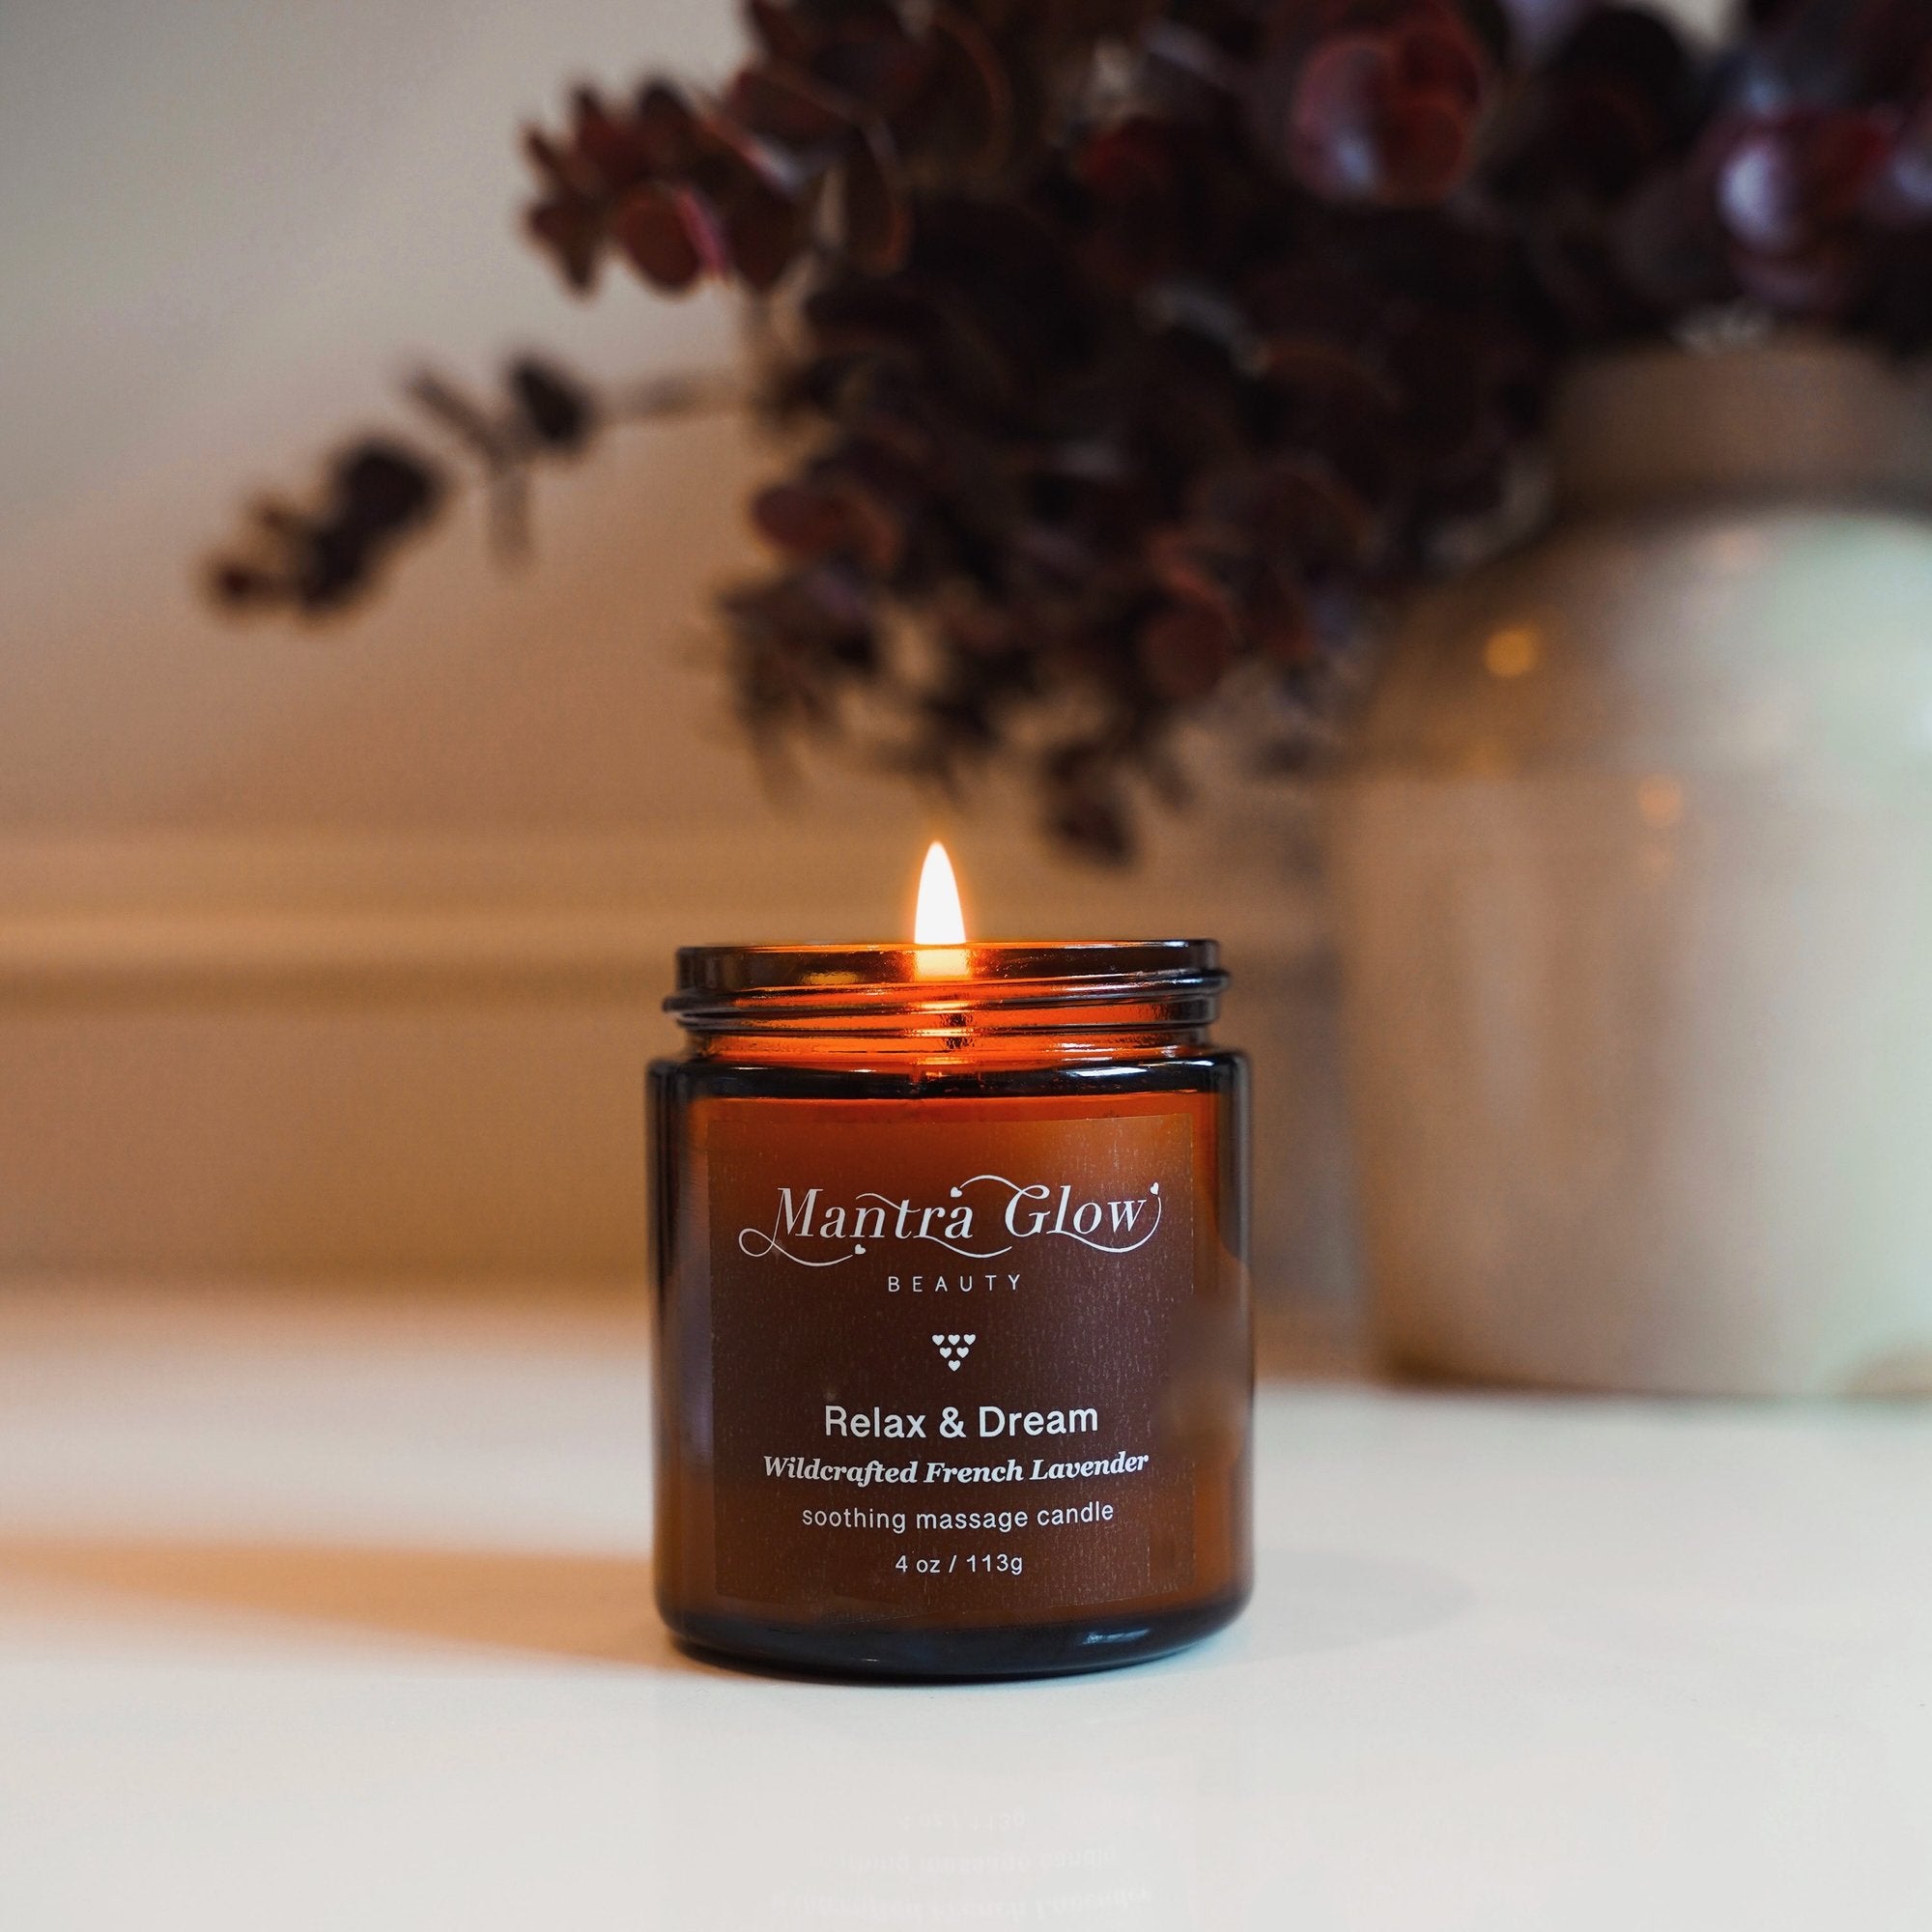 Relax & Dream Wildcrafted French Lavender Massage Candle